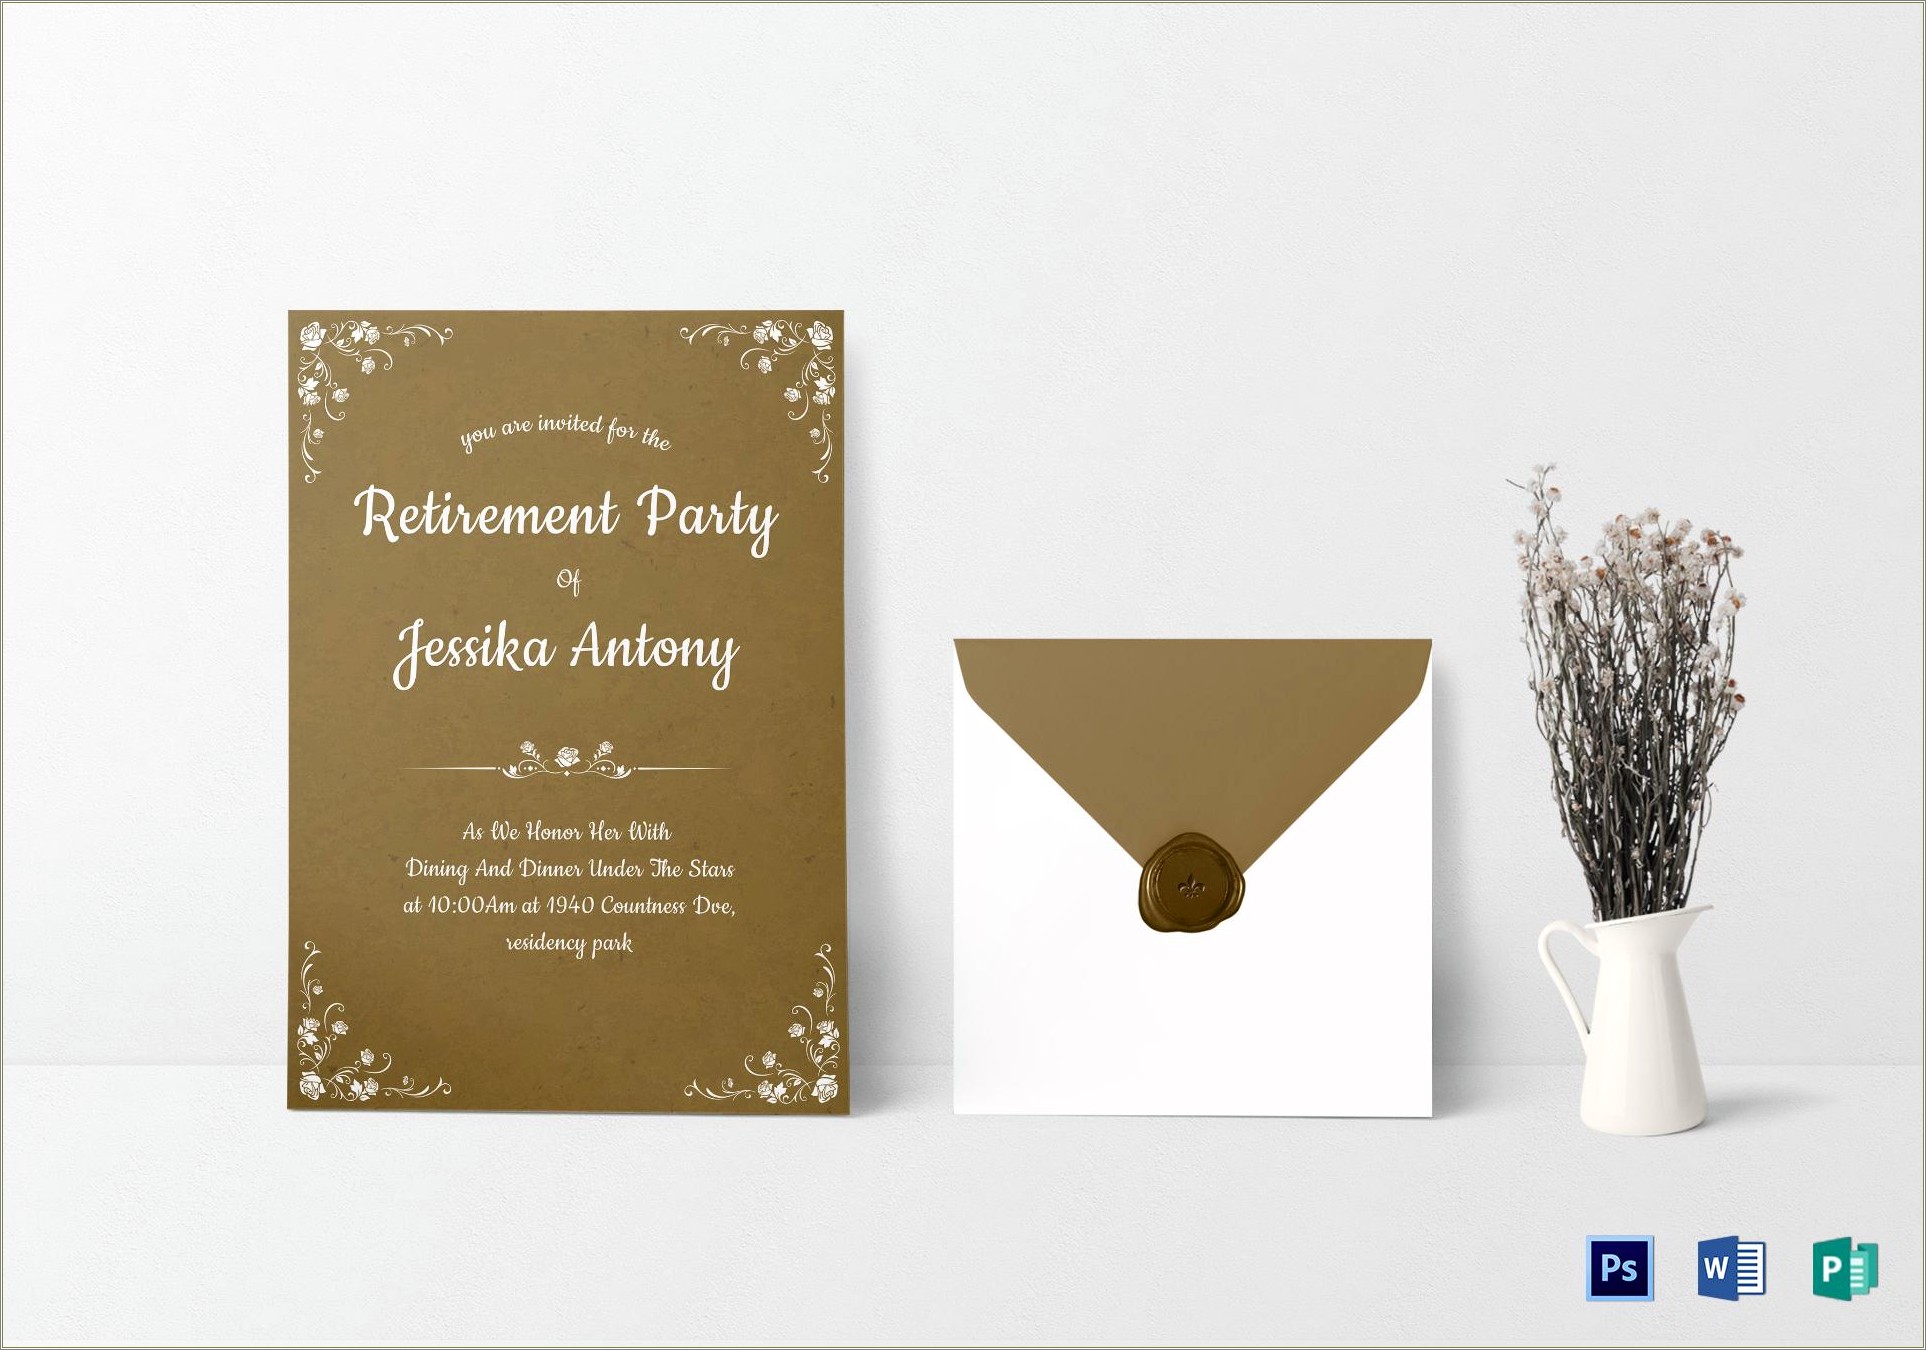 Free Teacher Retirement Party Invitation Templates For Word